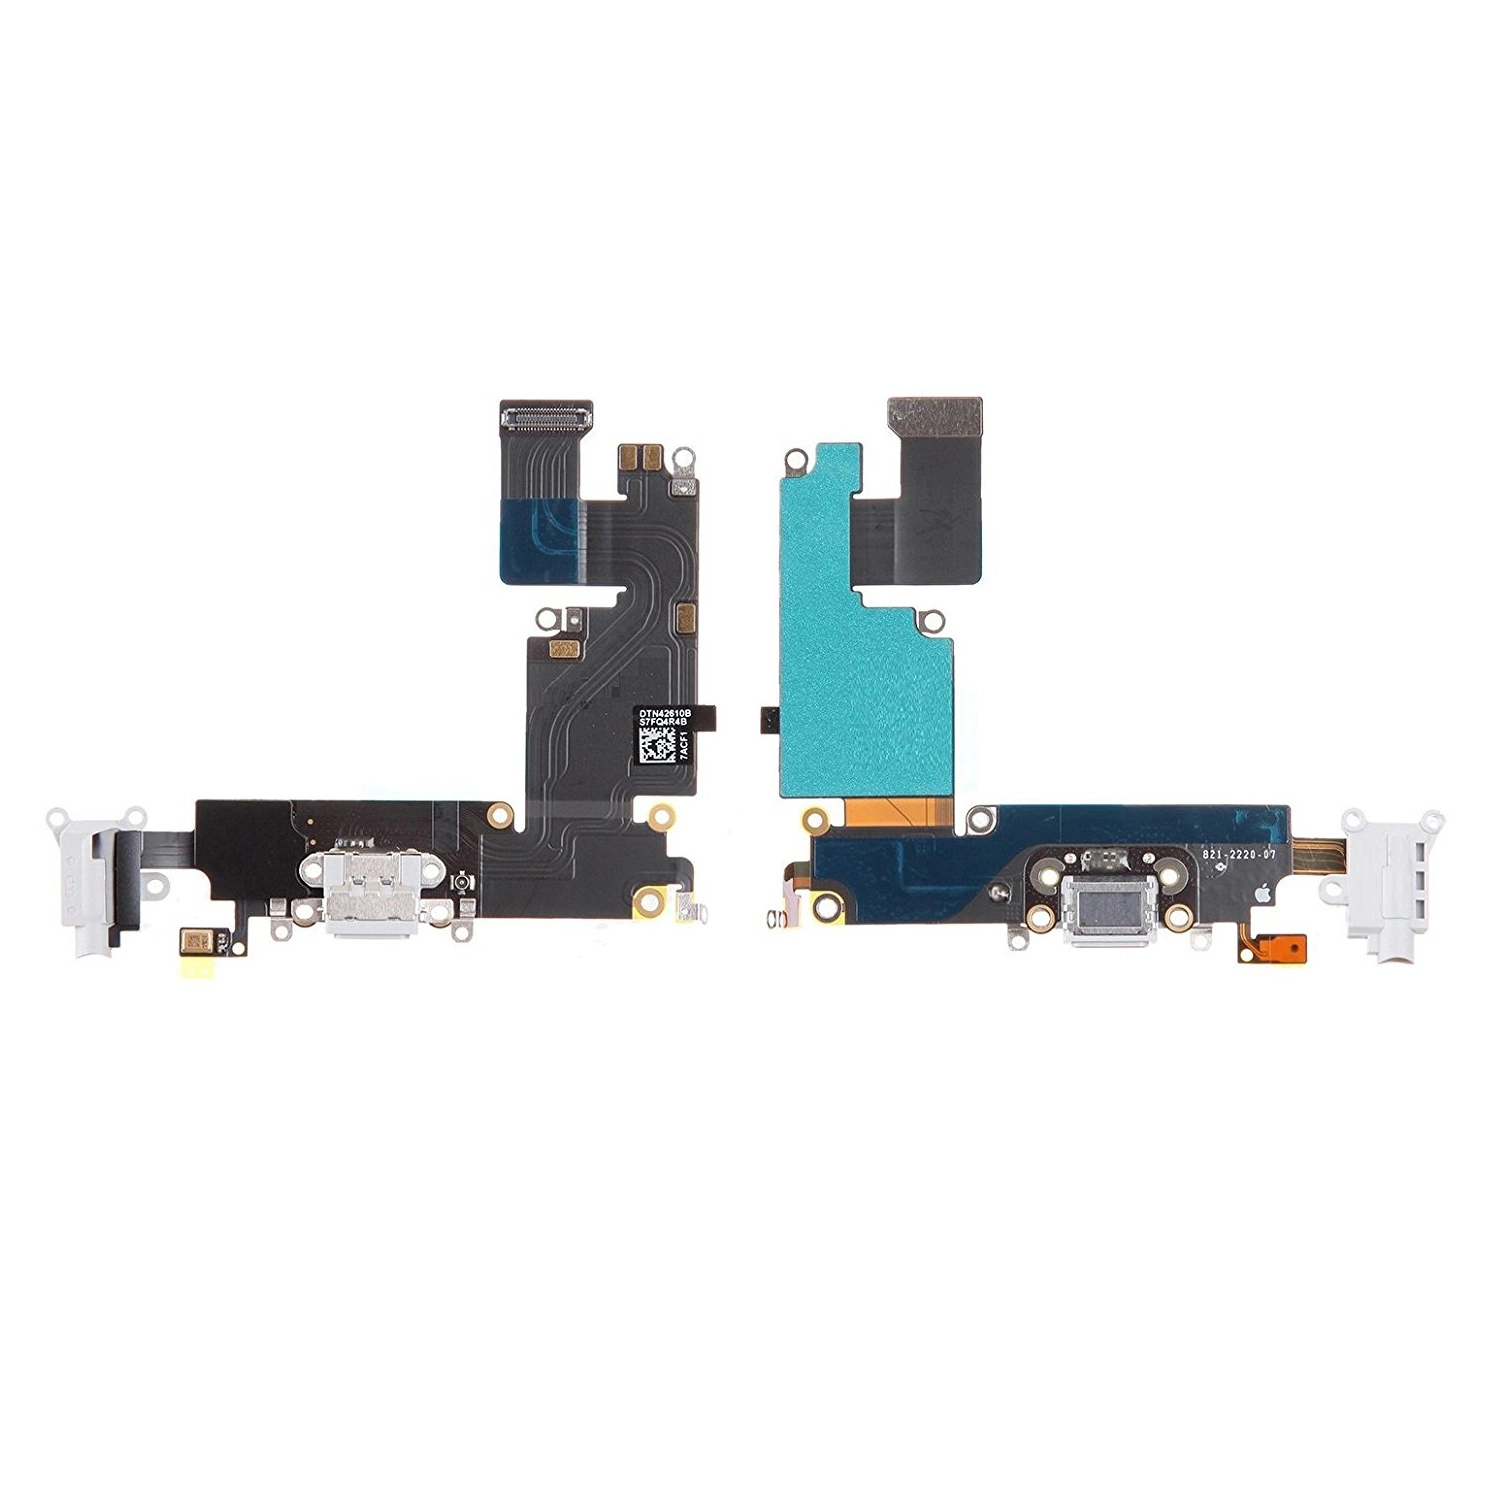 Cell Phone Flex 5.5 Flex Cable Ribbon Charger USB Micro Charging Port Dock Connector Headphone Jack and Mic (white) for iPhone 6 Plus